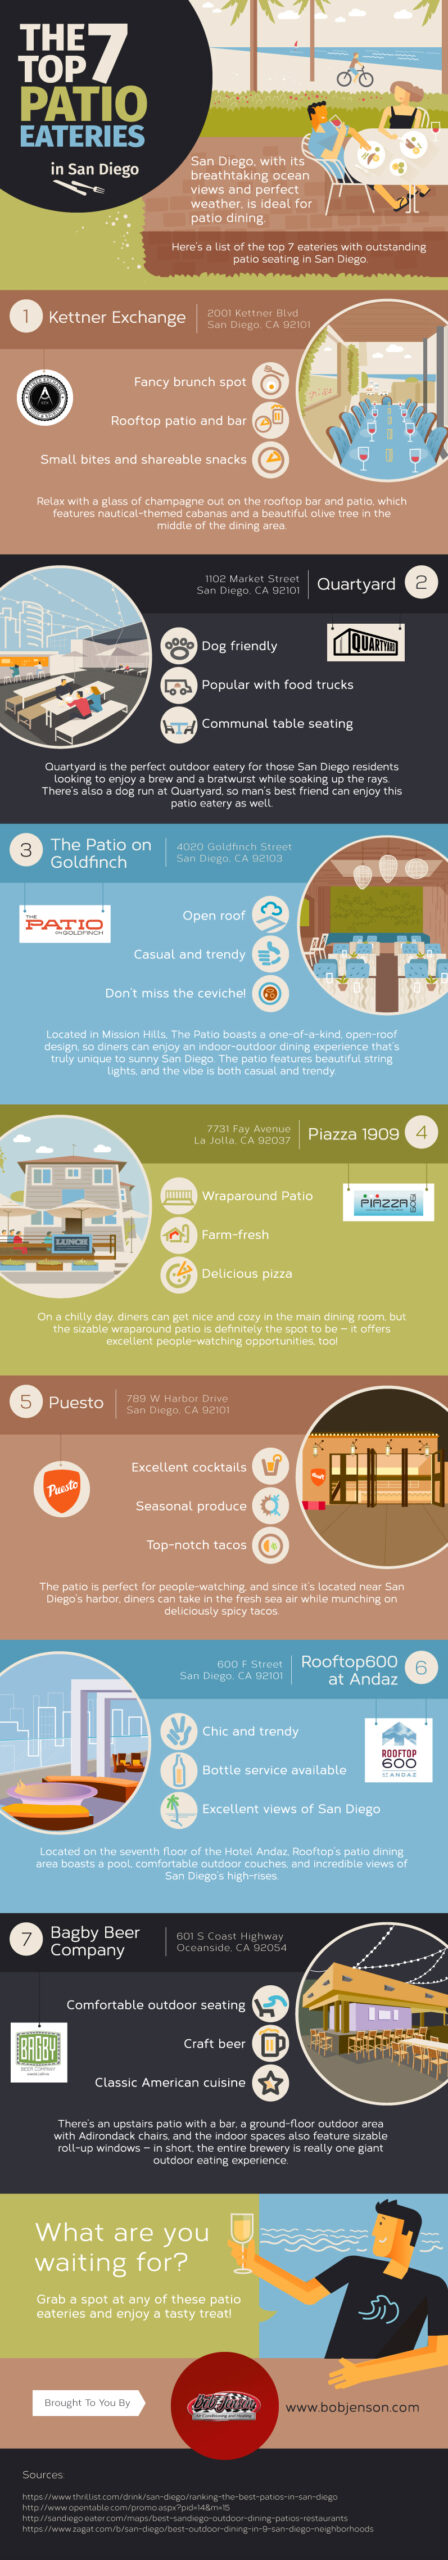 Infographic displaying top San Diego patio dining spots